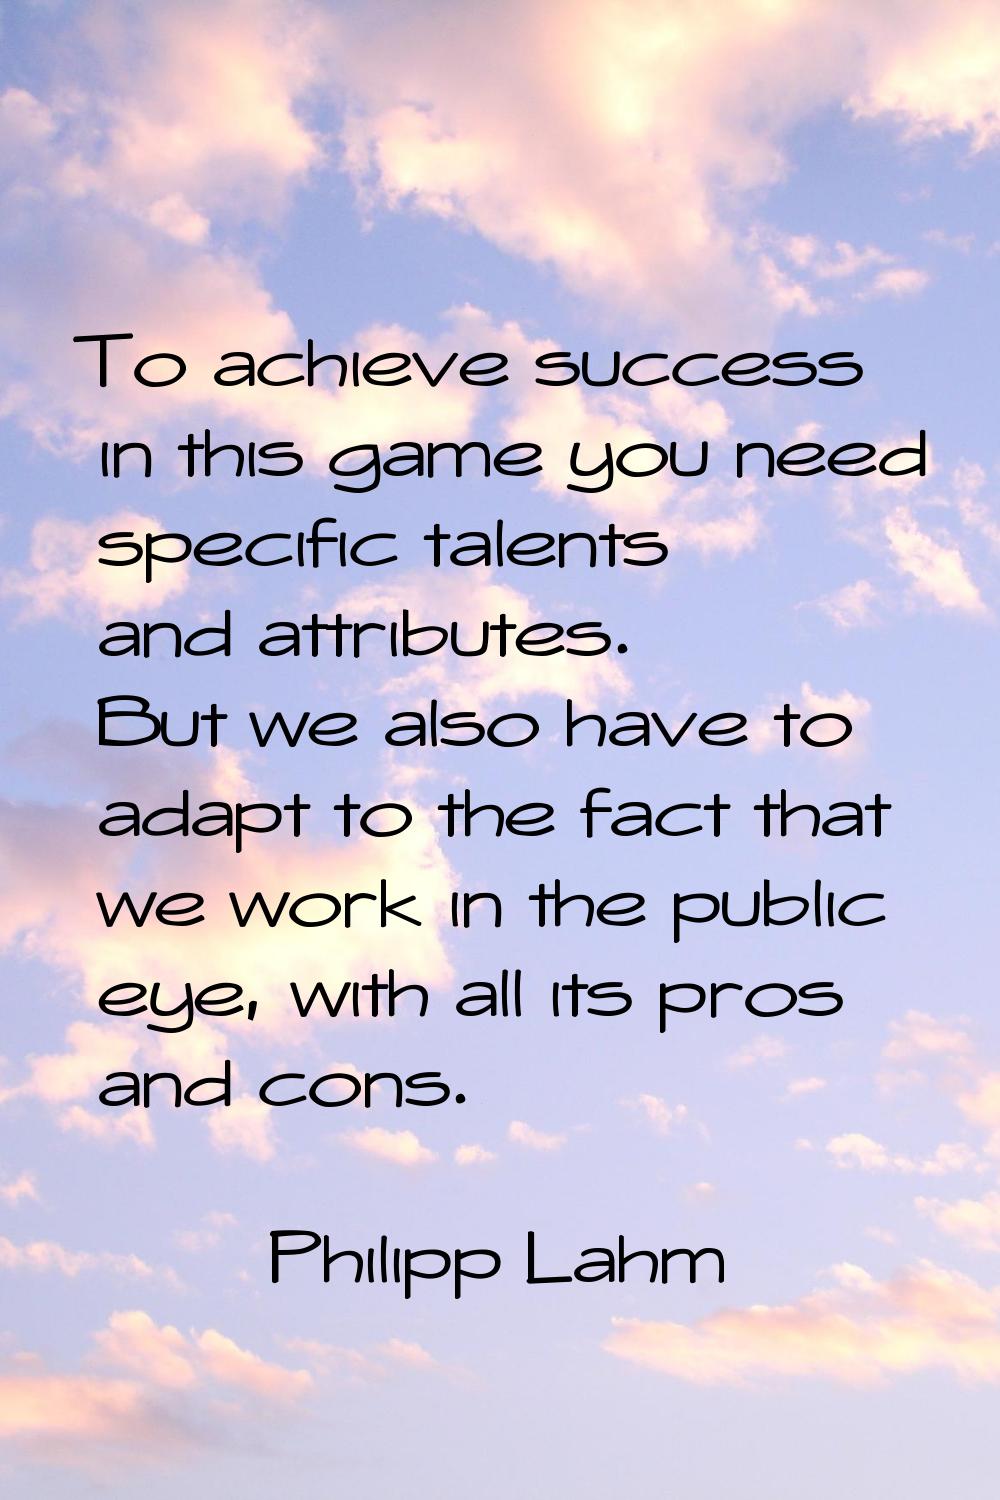 To achieve success in this game you need specific talents and attributes. But we also have to adapt